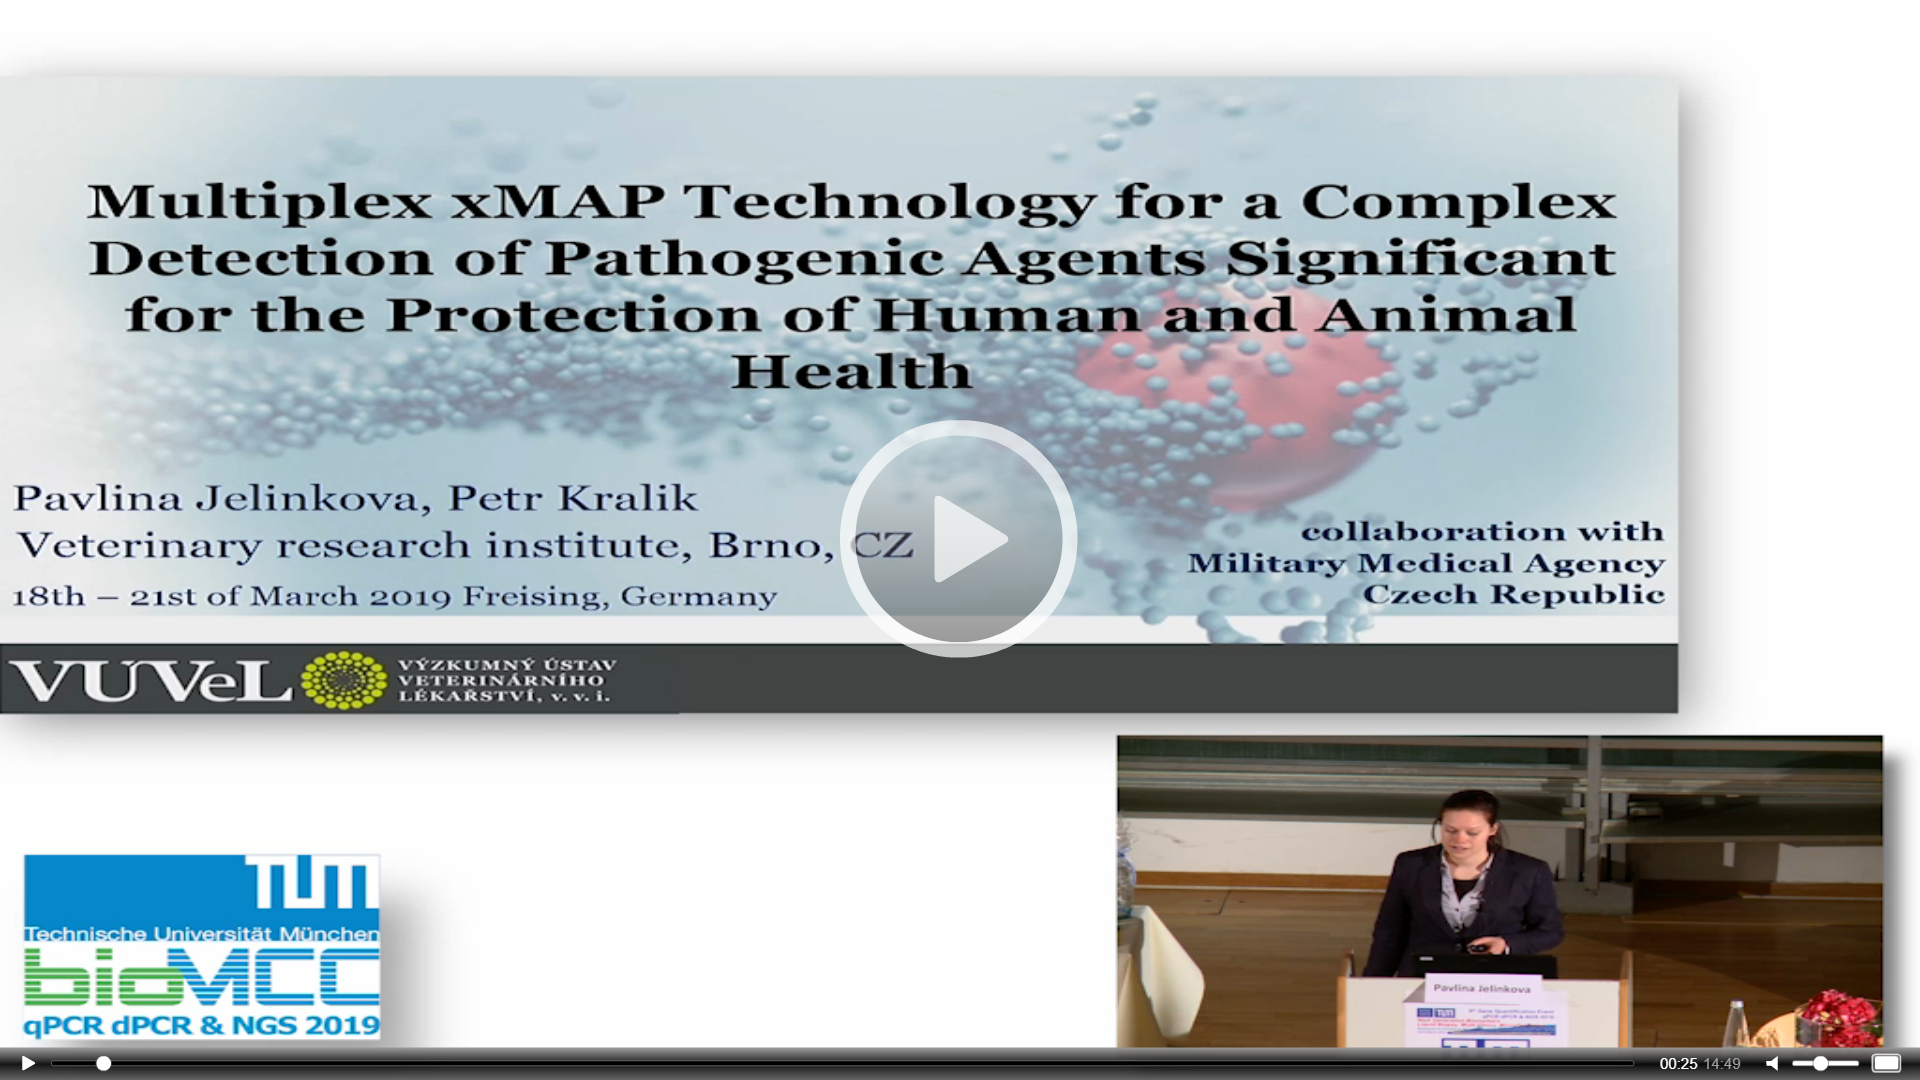 Multiplex xMAP Technology for a Complex Detection of Pathogenic Agents Significant for the Protection of Human and Animal Health